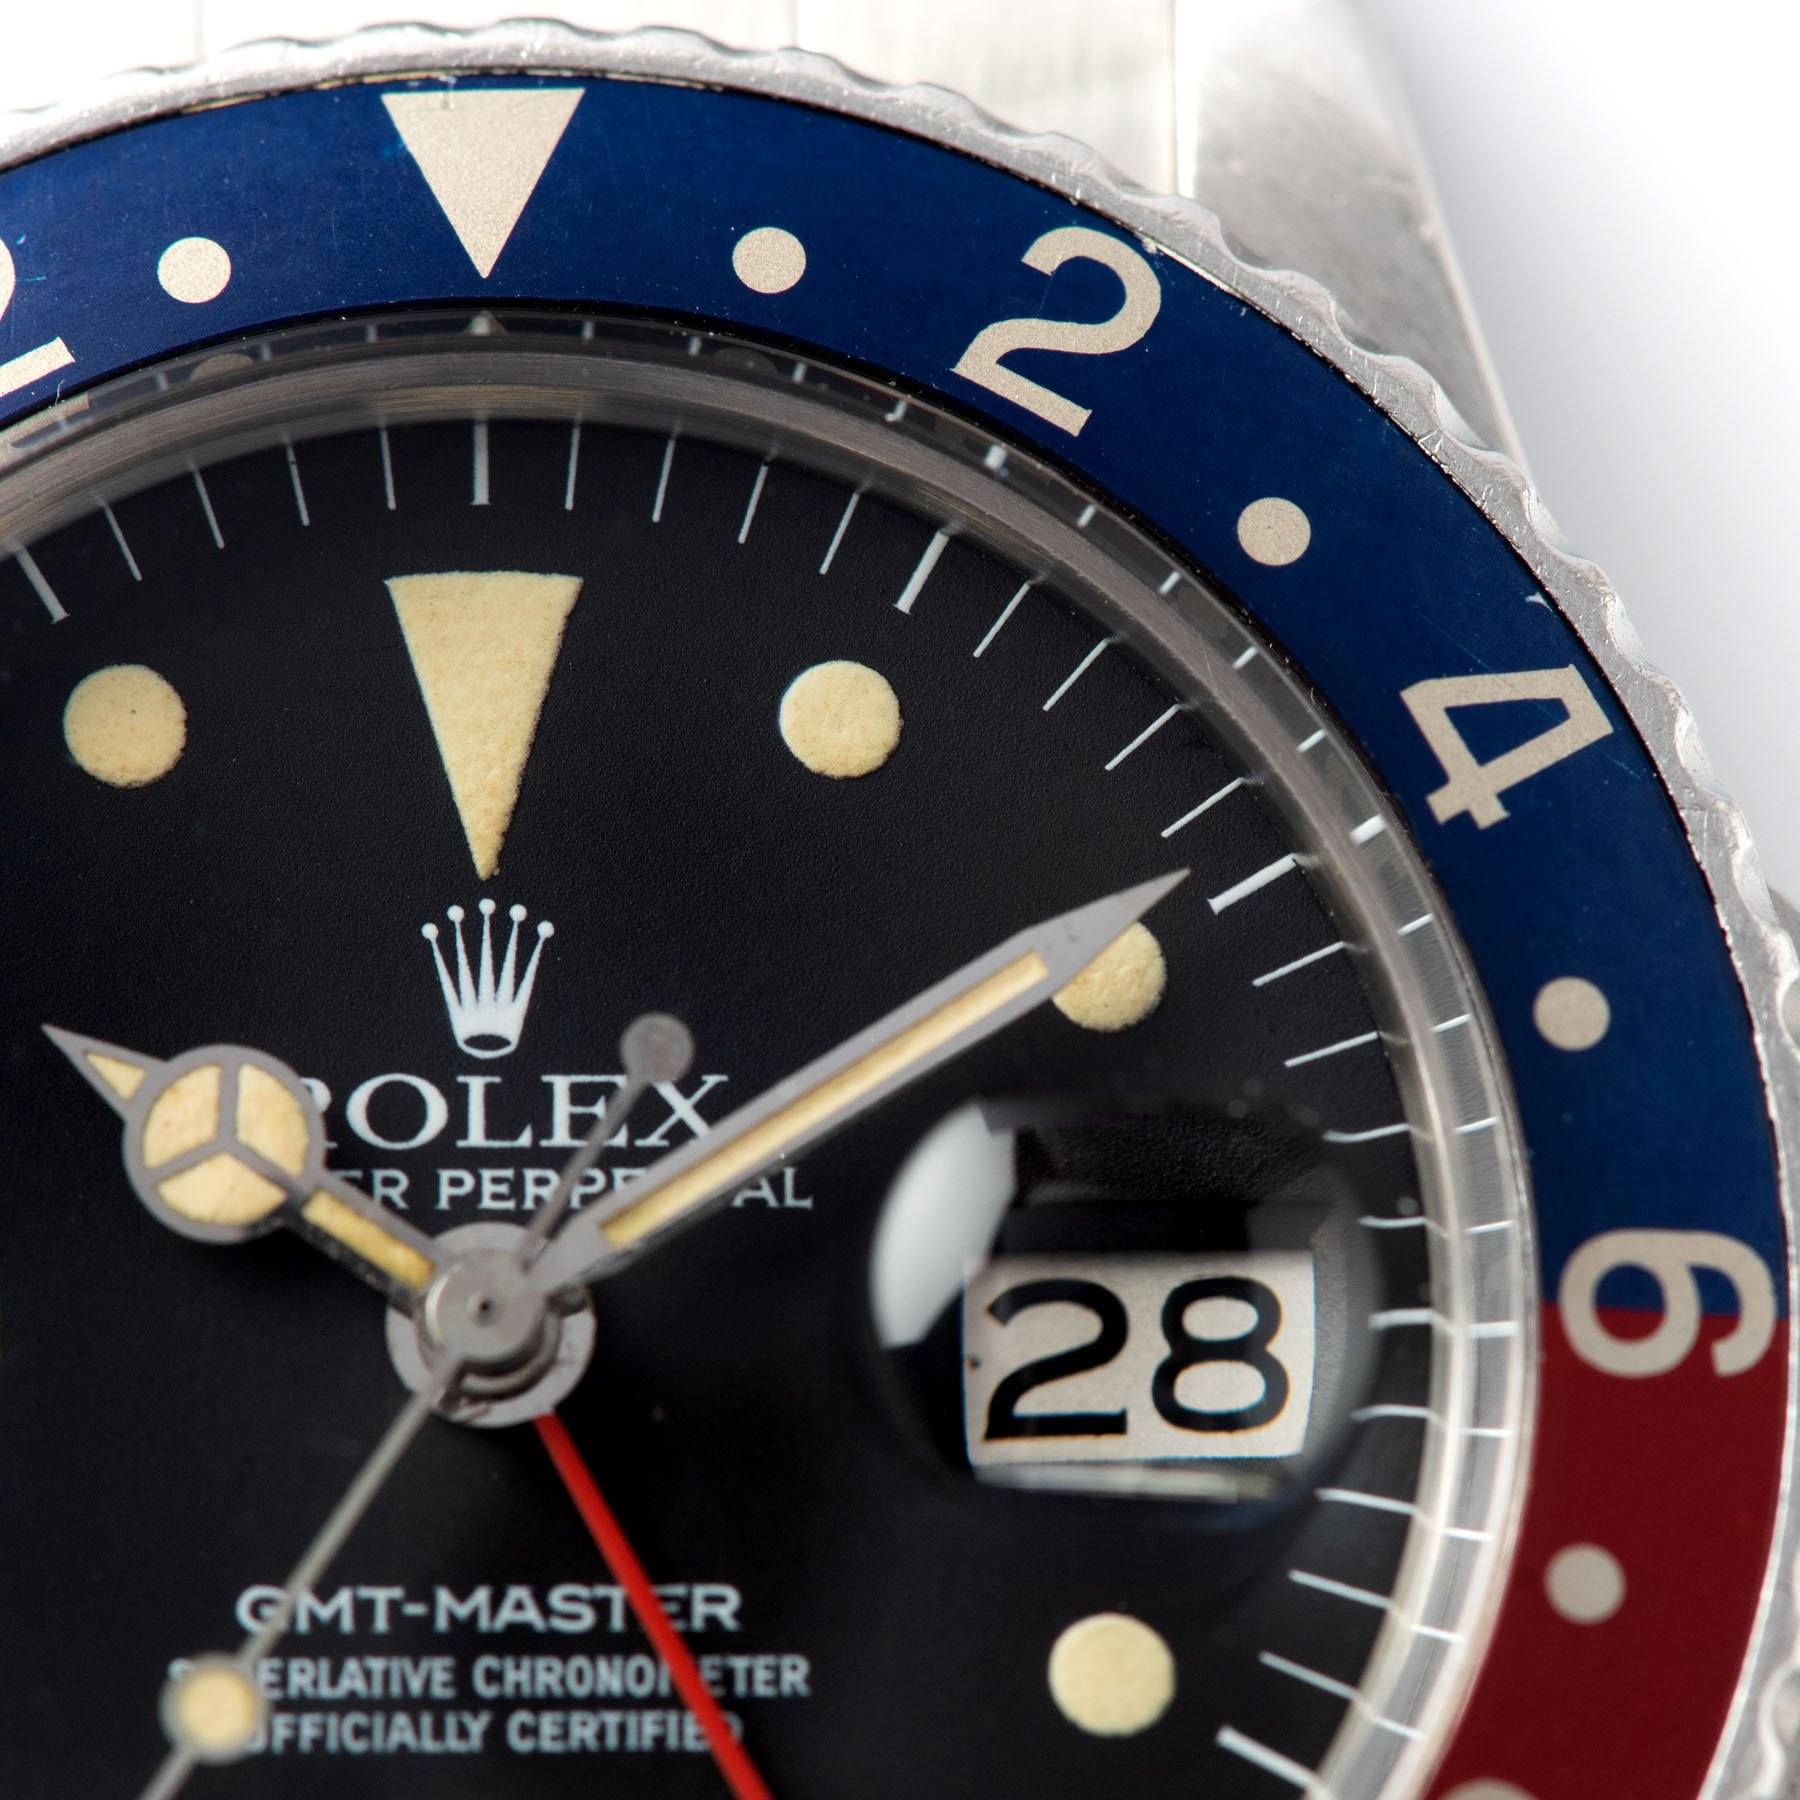 Rolex 1675 Mk3 Radial Dial GMT Master  dating to 1976